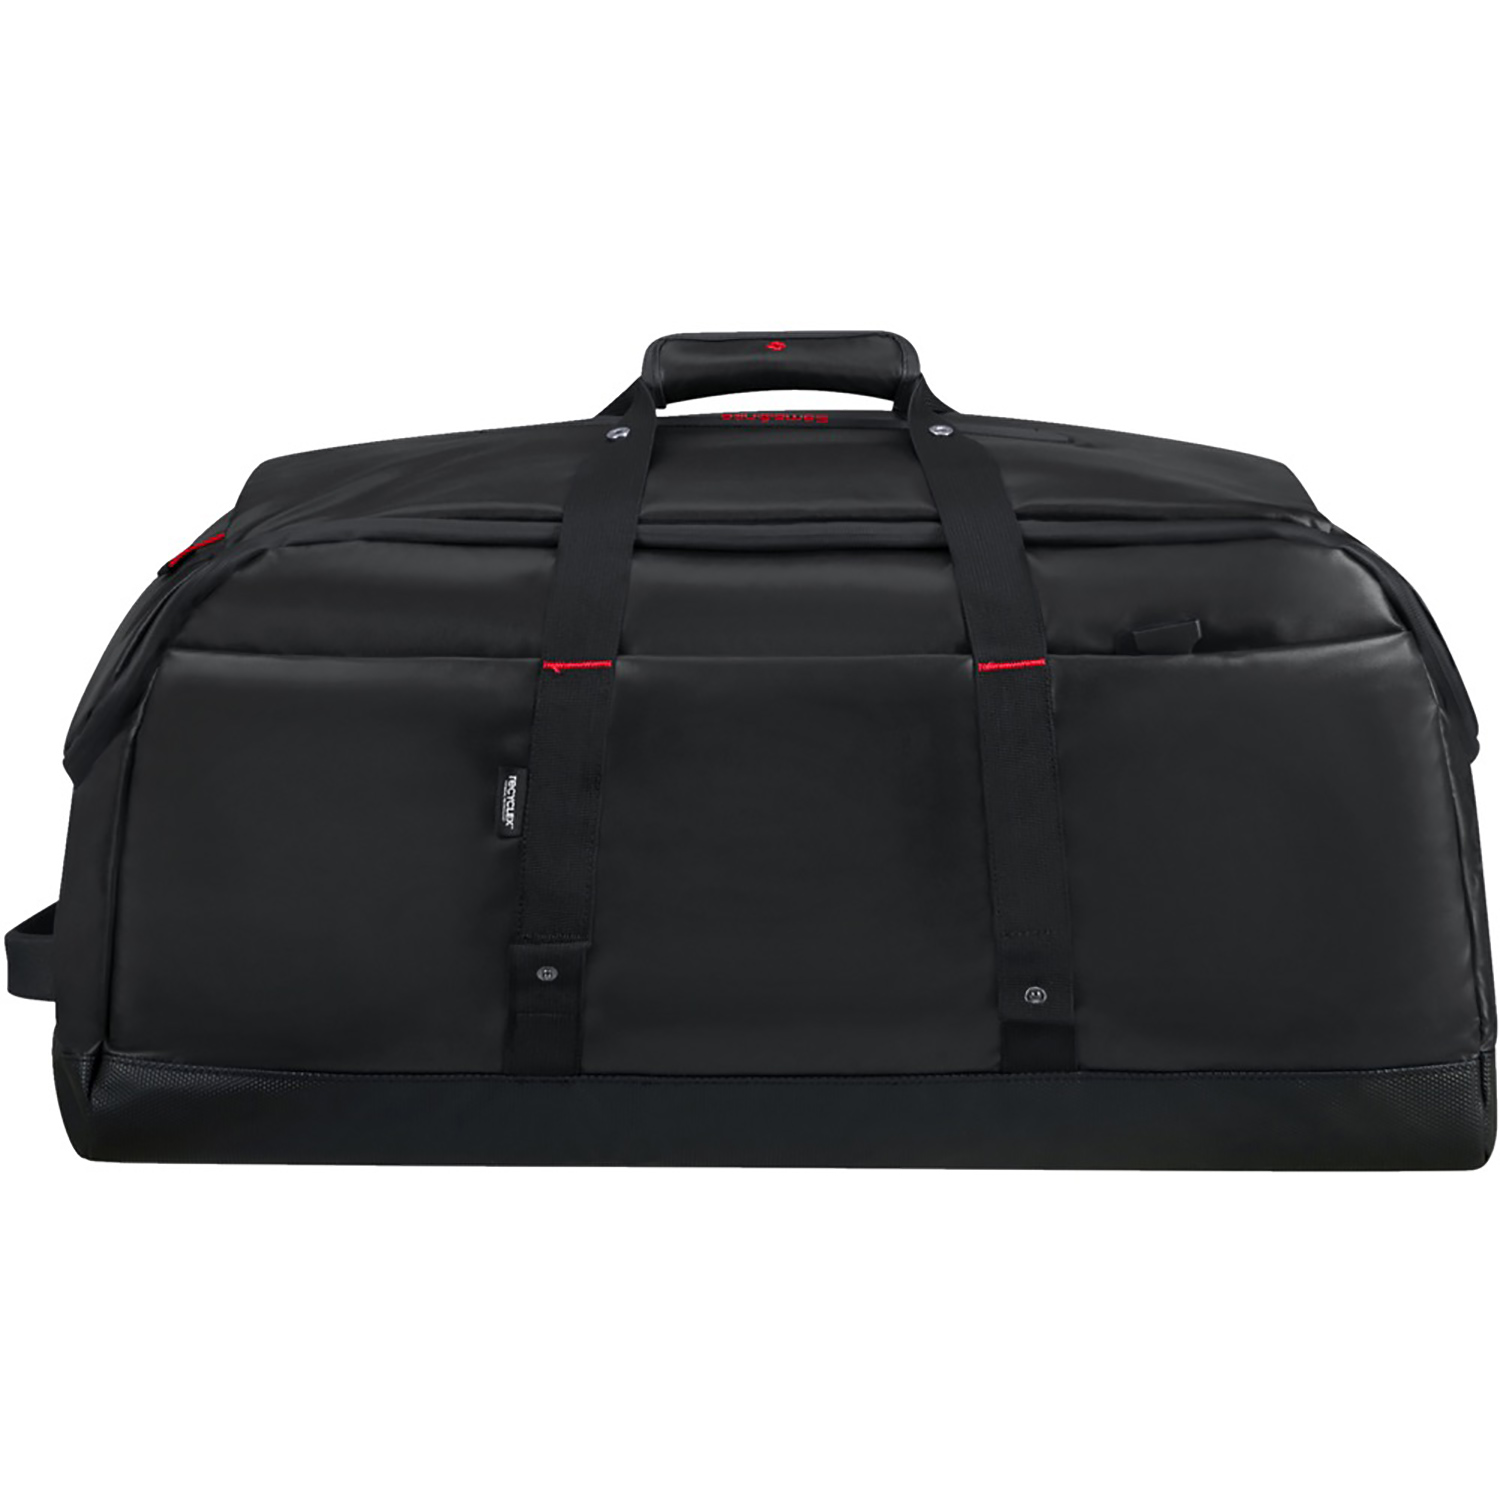 Samsonite Paradiver Light Wheeled Duffle 67cm at Luggage Superstore